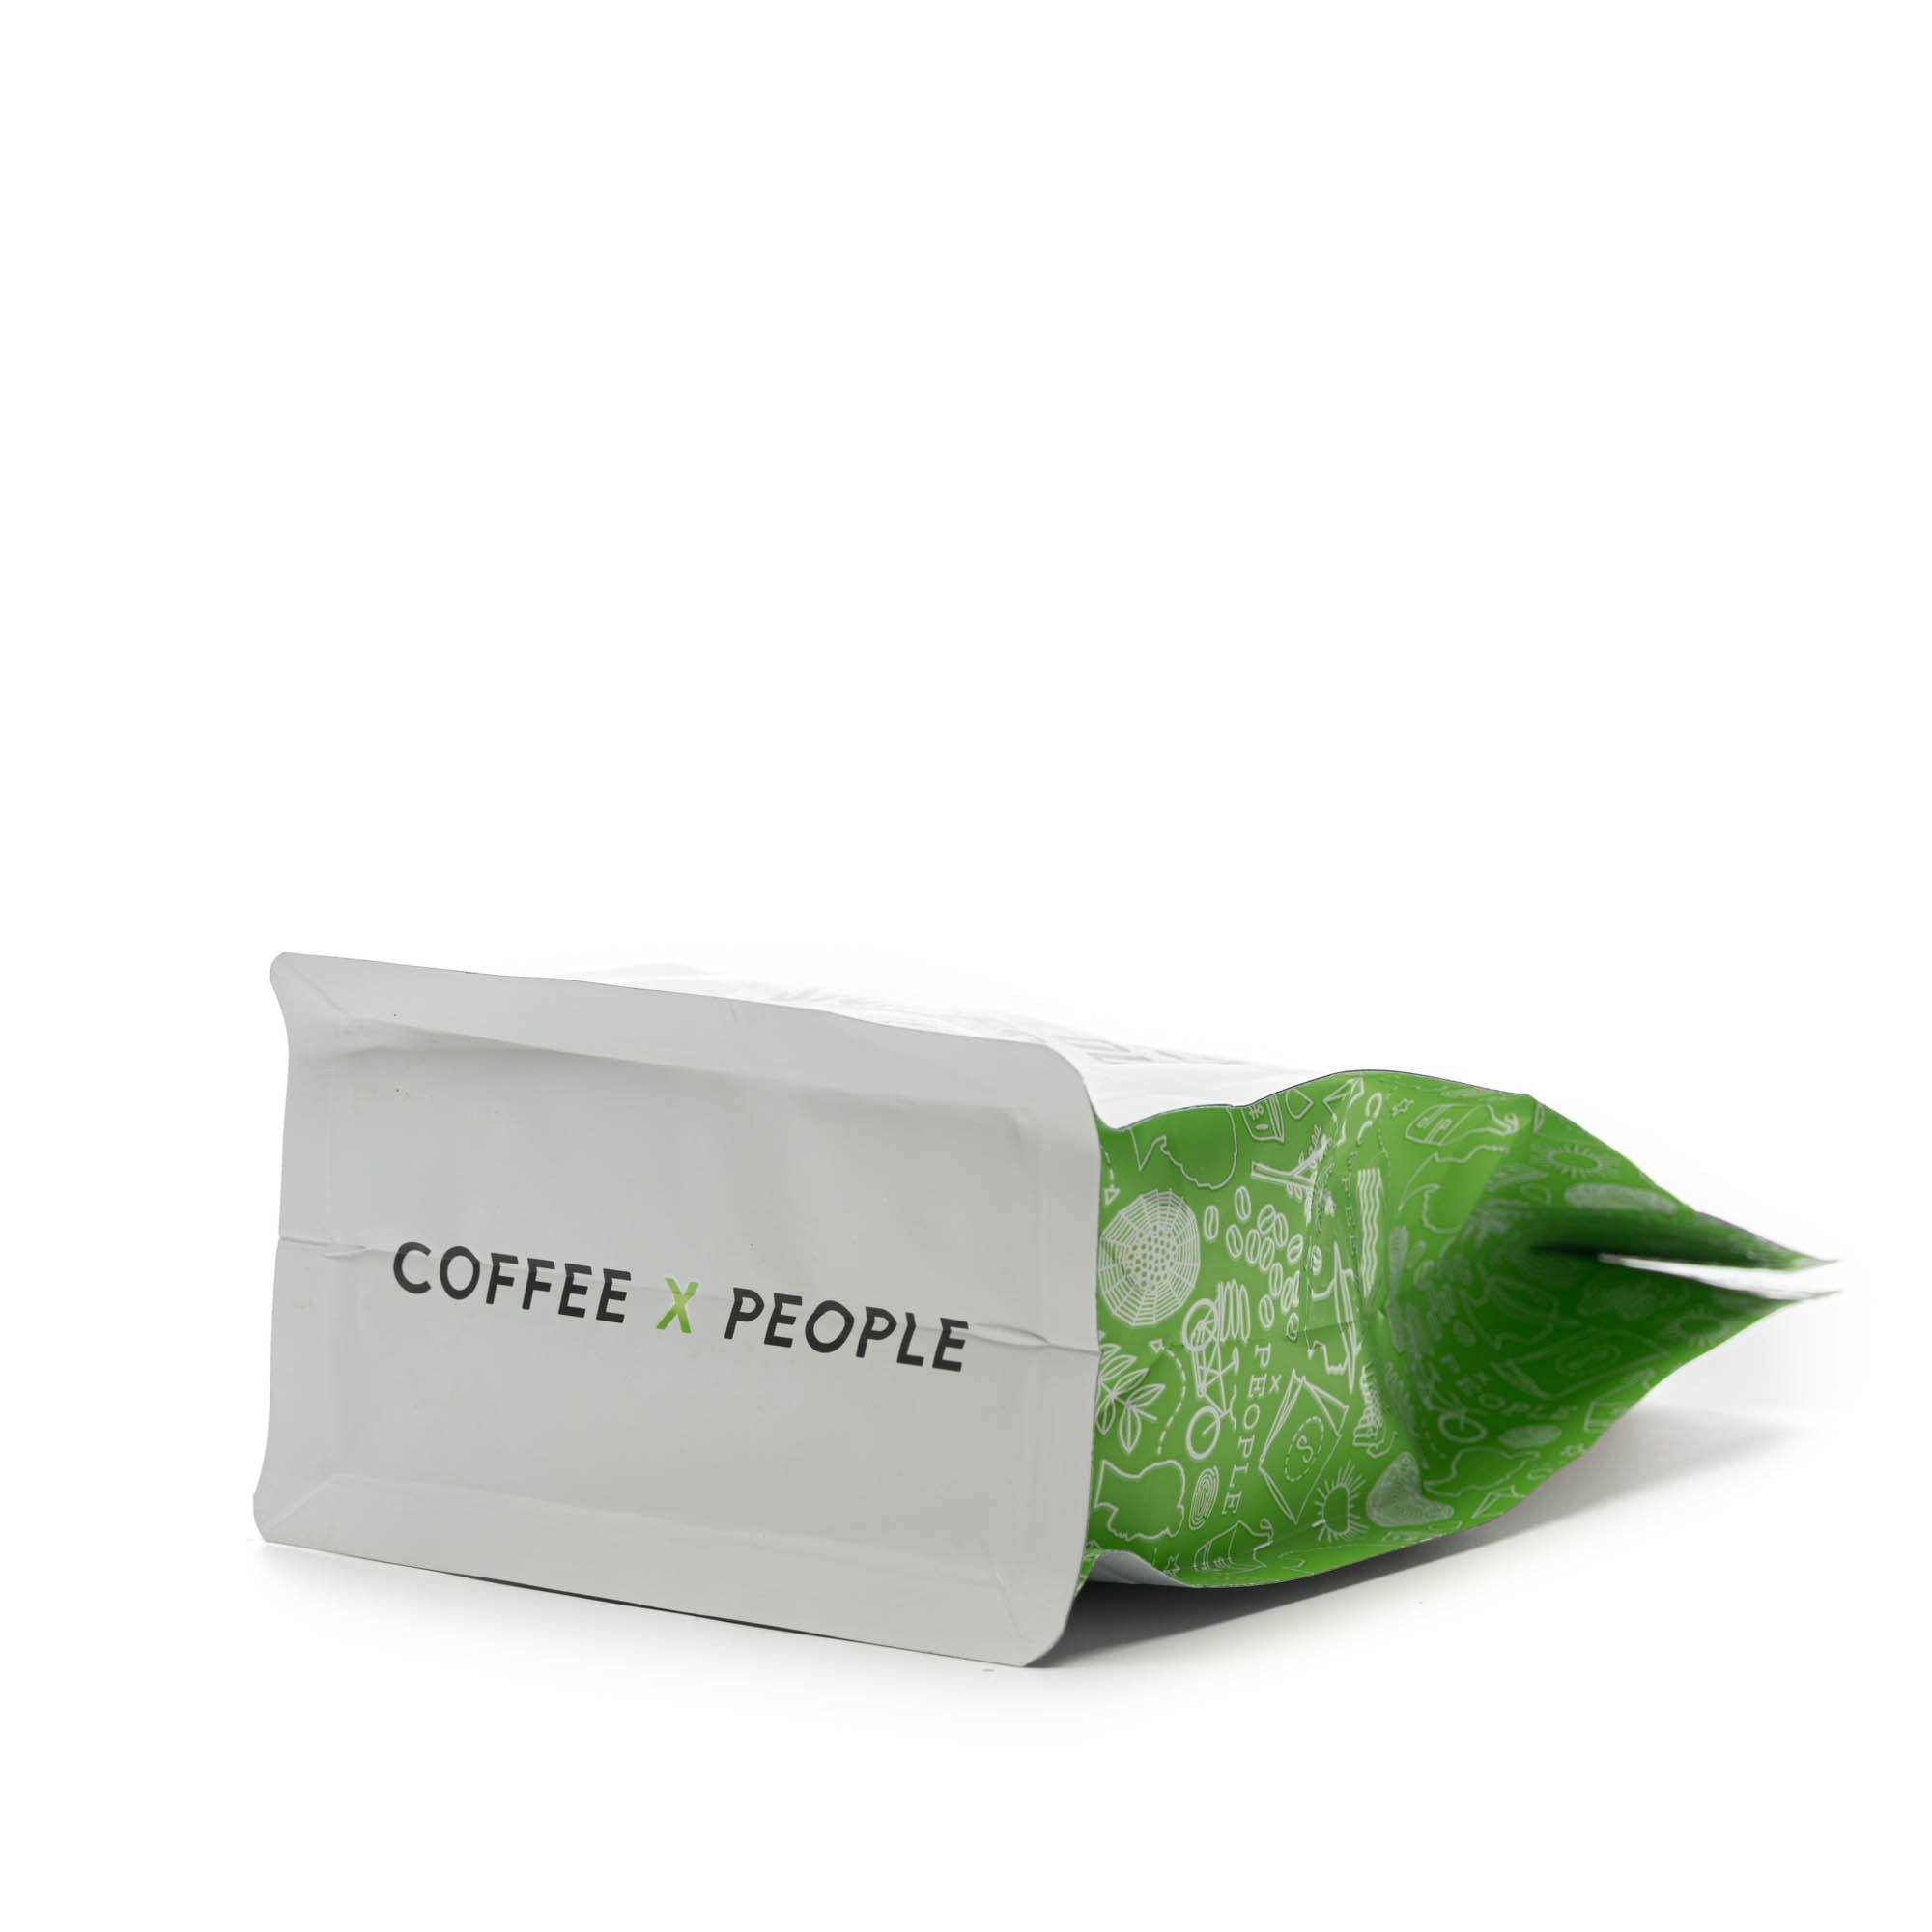 This image shows the bottom of our Single Origin Rwanda Coffee Bag, which reads “ coffee x people,” serving as a reminder of our mission to connect people over coffee.